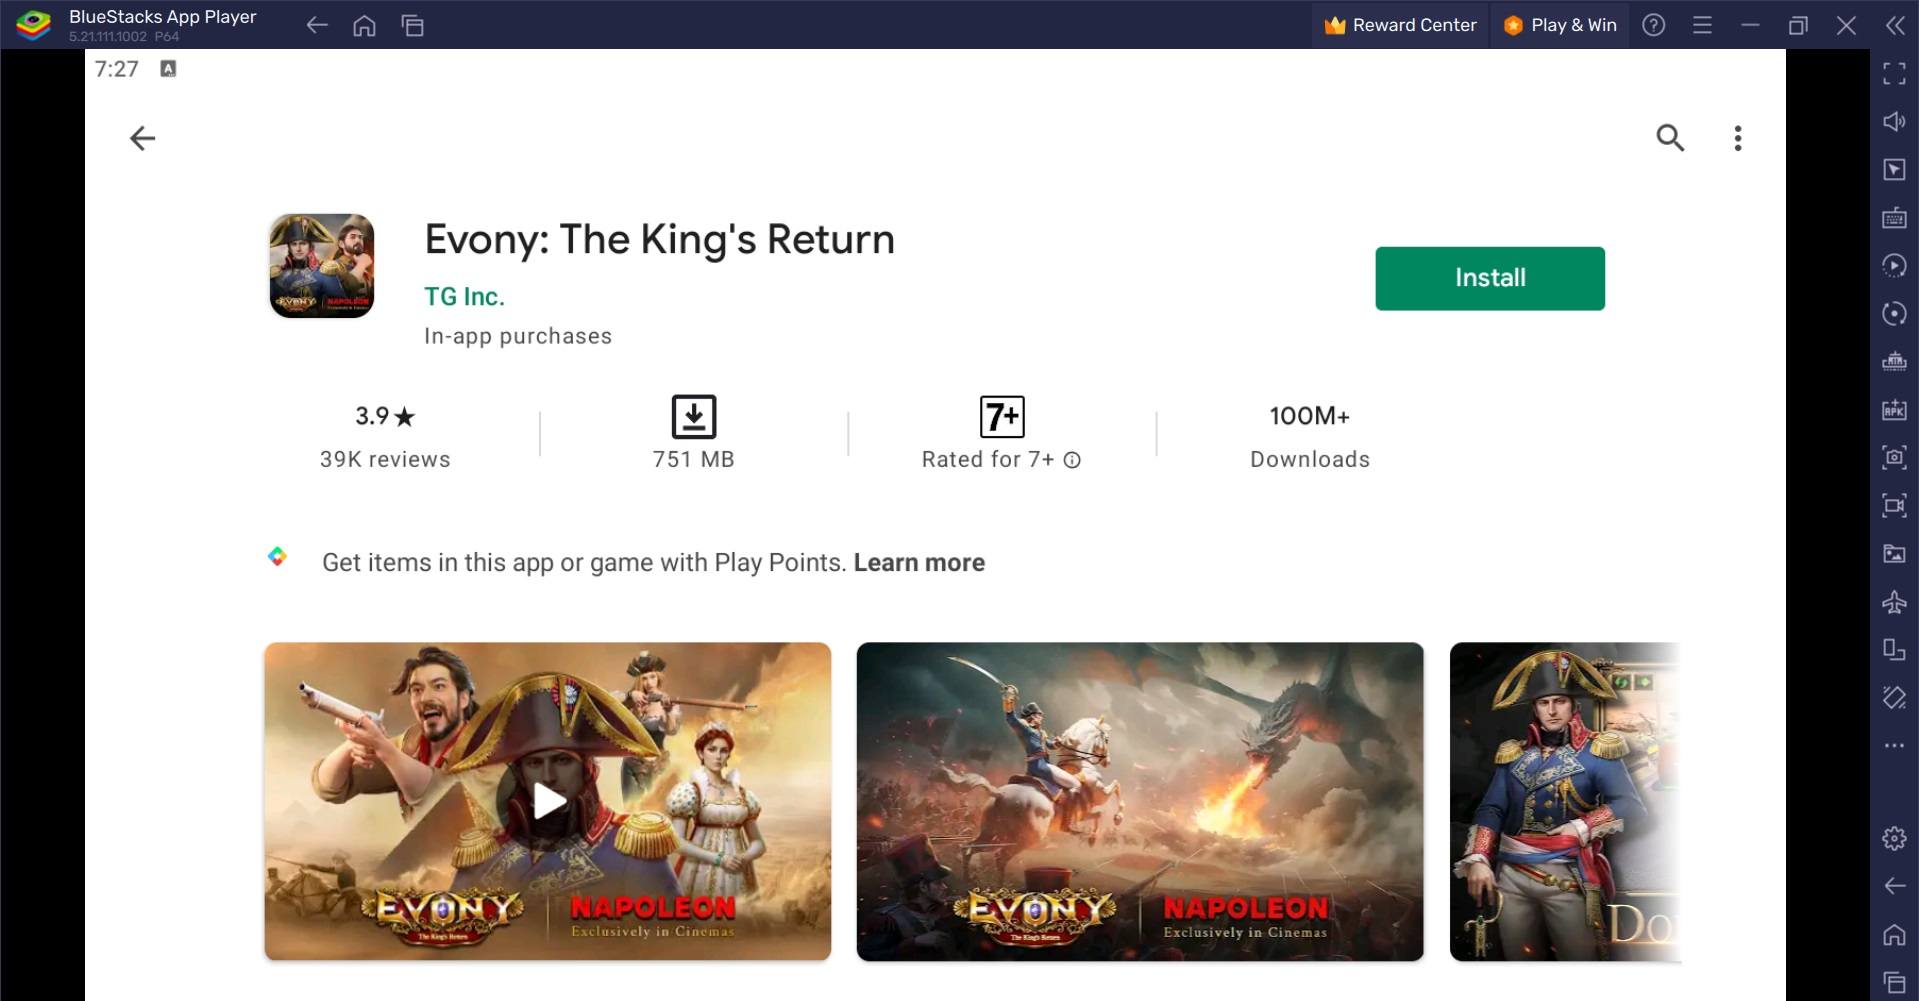 How to Play Evony: The King's Return on PC with BlueStacks